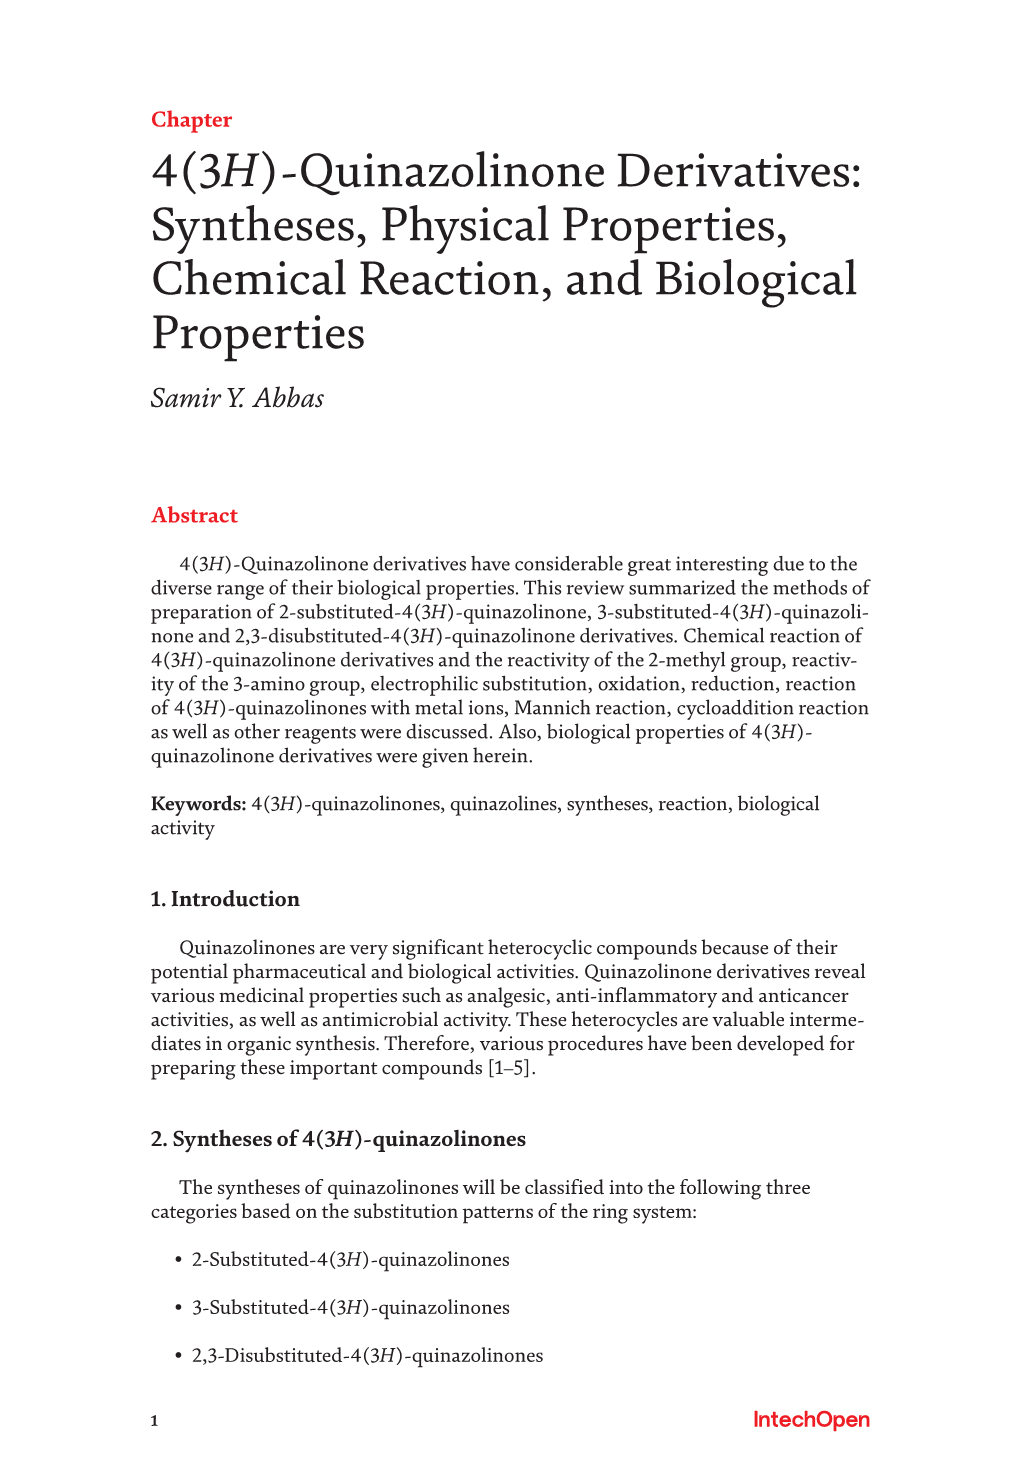 Quinazolinone Derivatives: Syntheses, Physical Properties, Chemical Reaction, and Biological Properties Samir Y